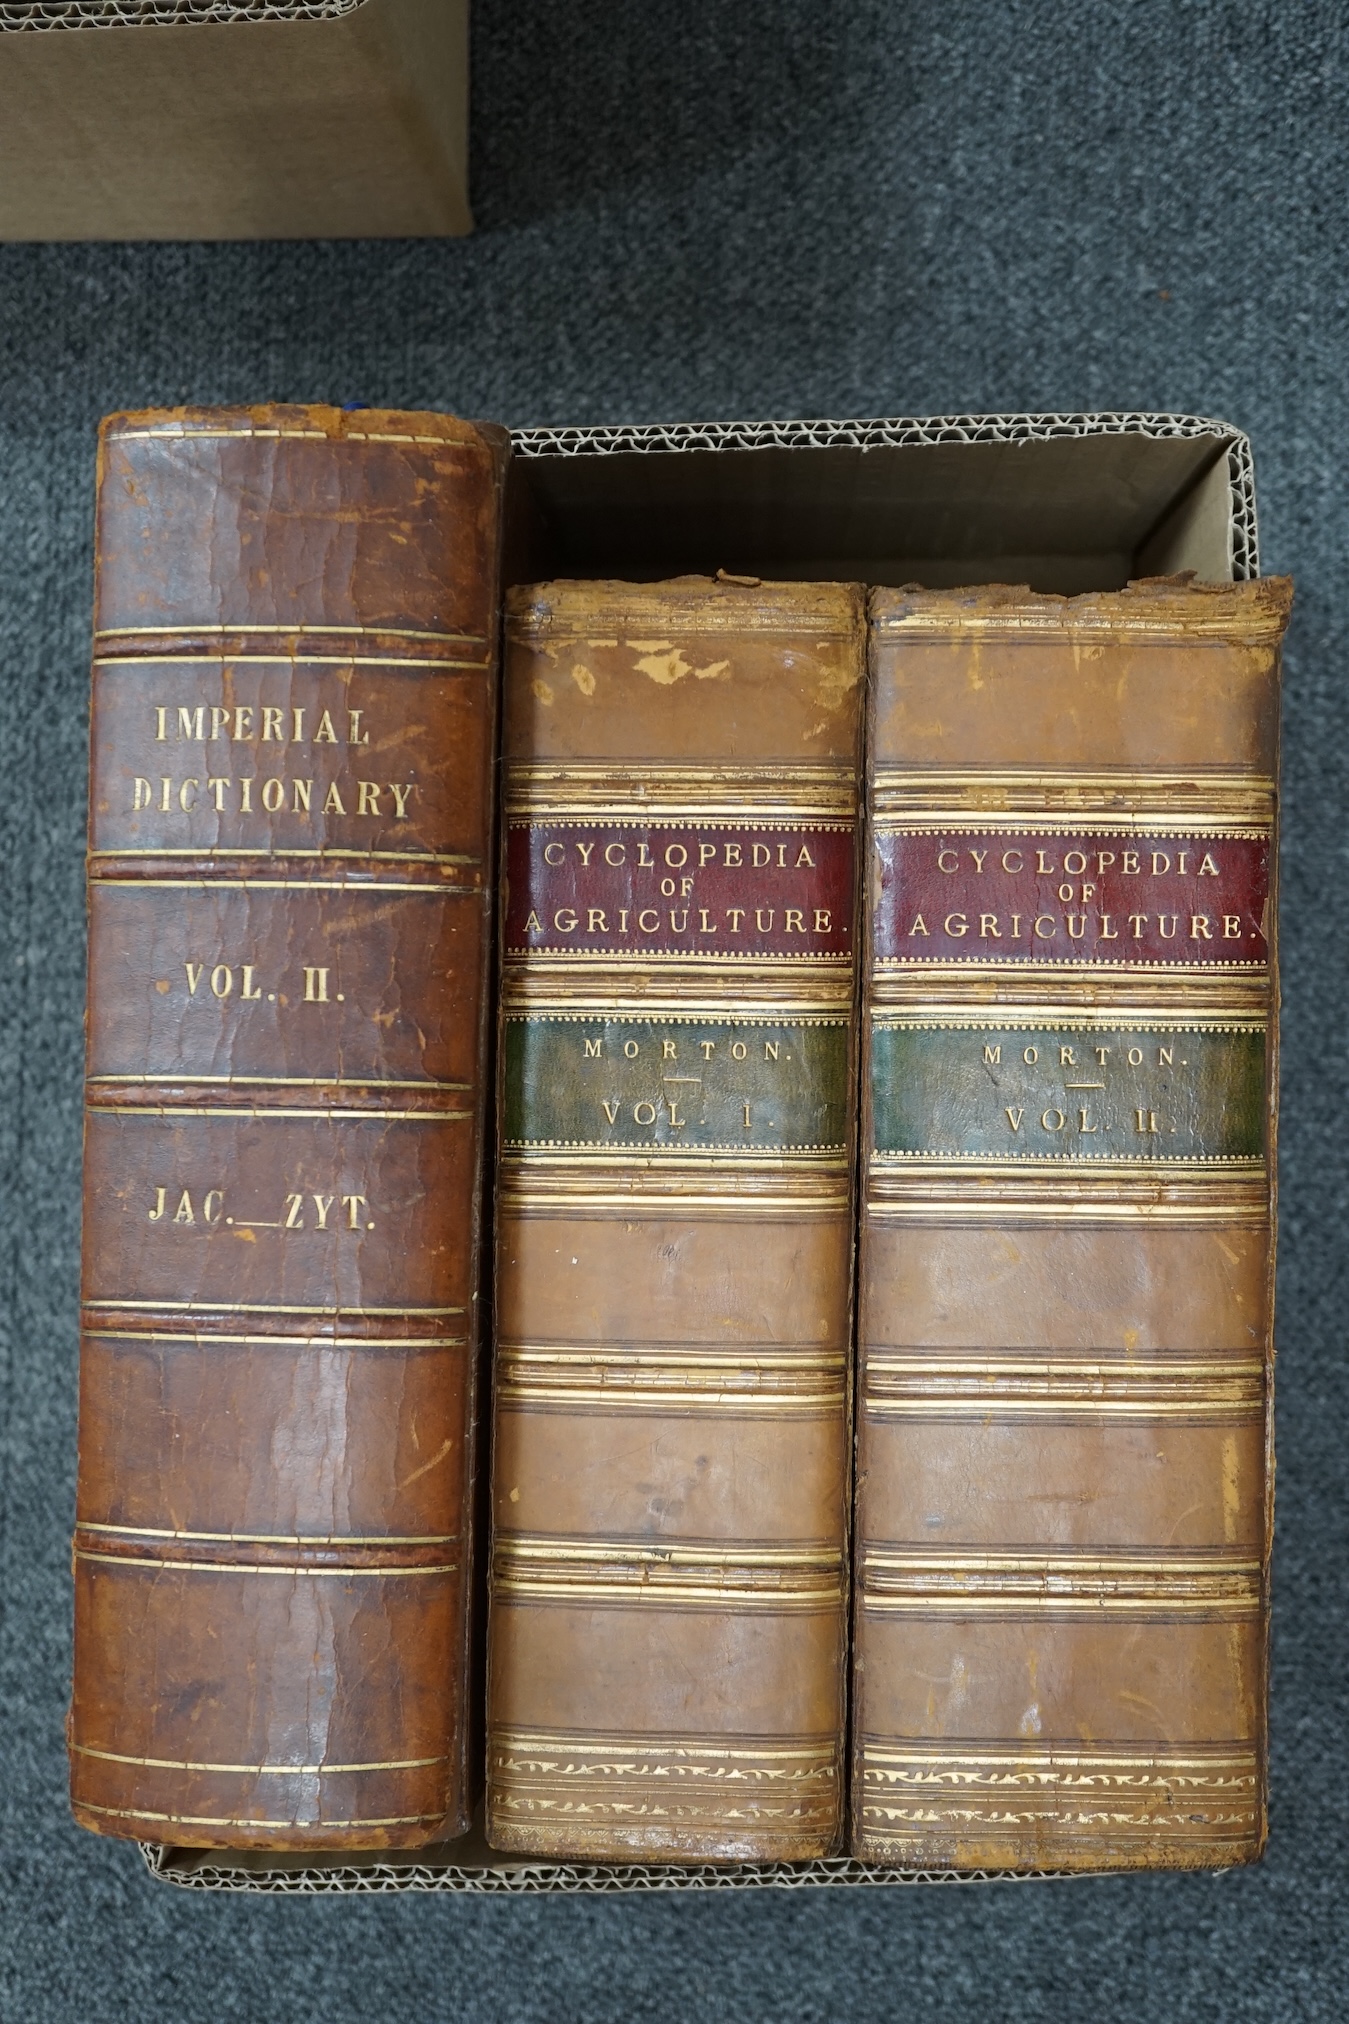 Bindings; Morton, John C. - Cyclopedia of Agriculture, 1863, 2 vols. Byron - Poetical Works, 1870. Spenser, E. -Works 1869. Imperial Dictionary 1850, vol II only. Goldsmith's Works 1854, 4vols, Godolphin School Prize. Di